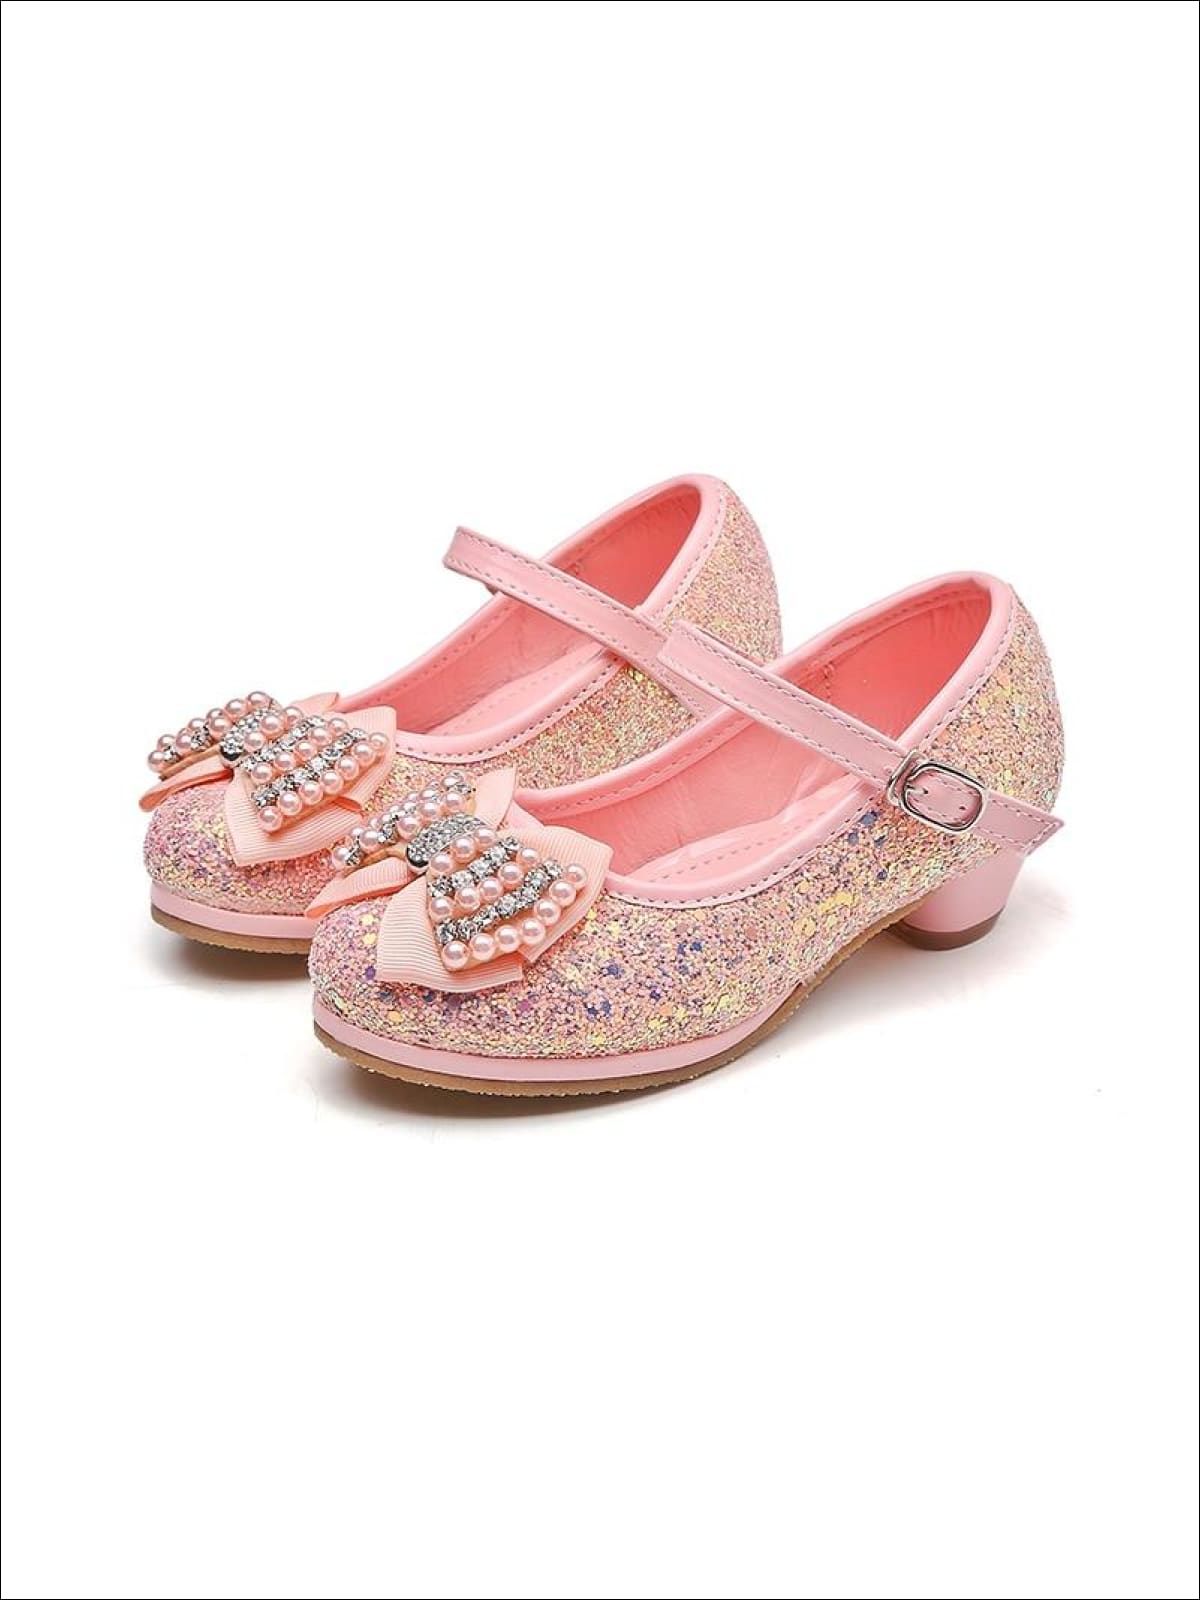 Girls Glitter Bow Tie Pearl Embellished Princess Shoes - Pink / 1 - Girls Flats